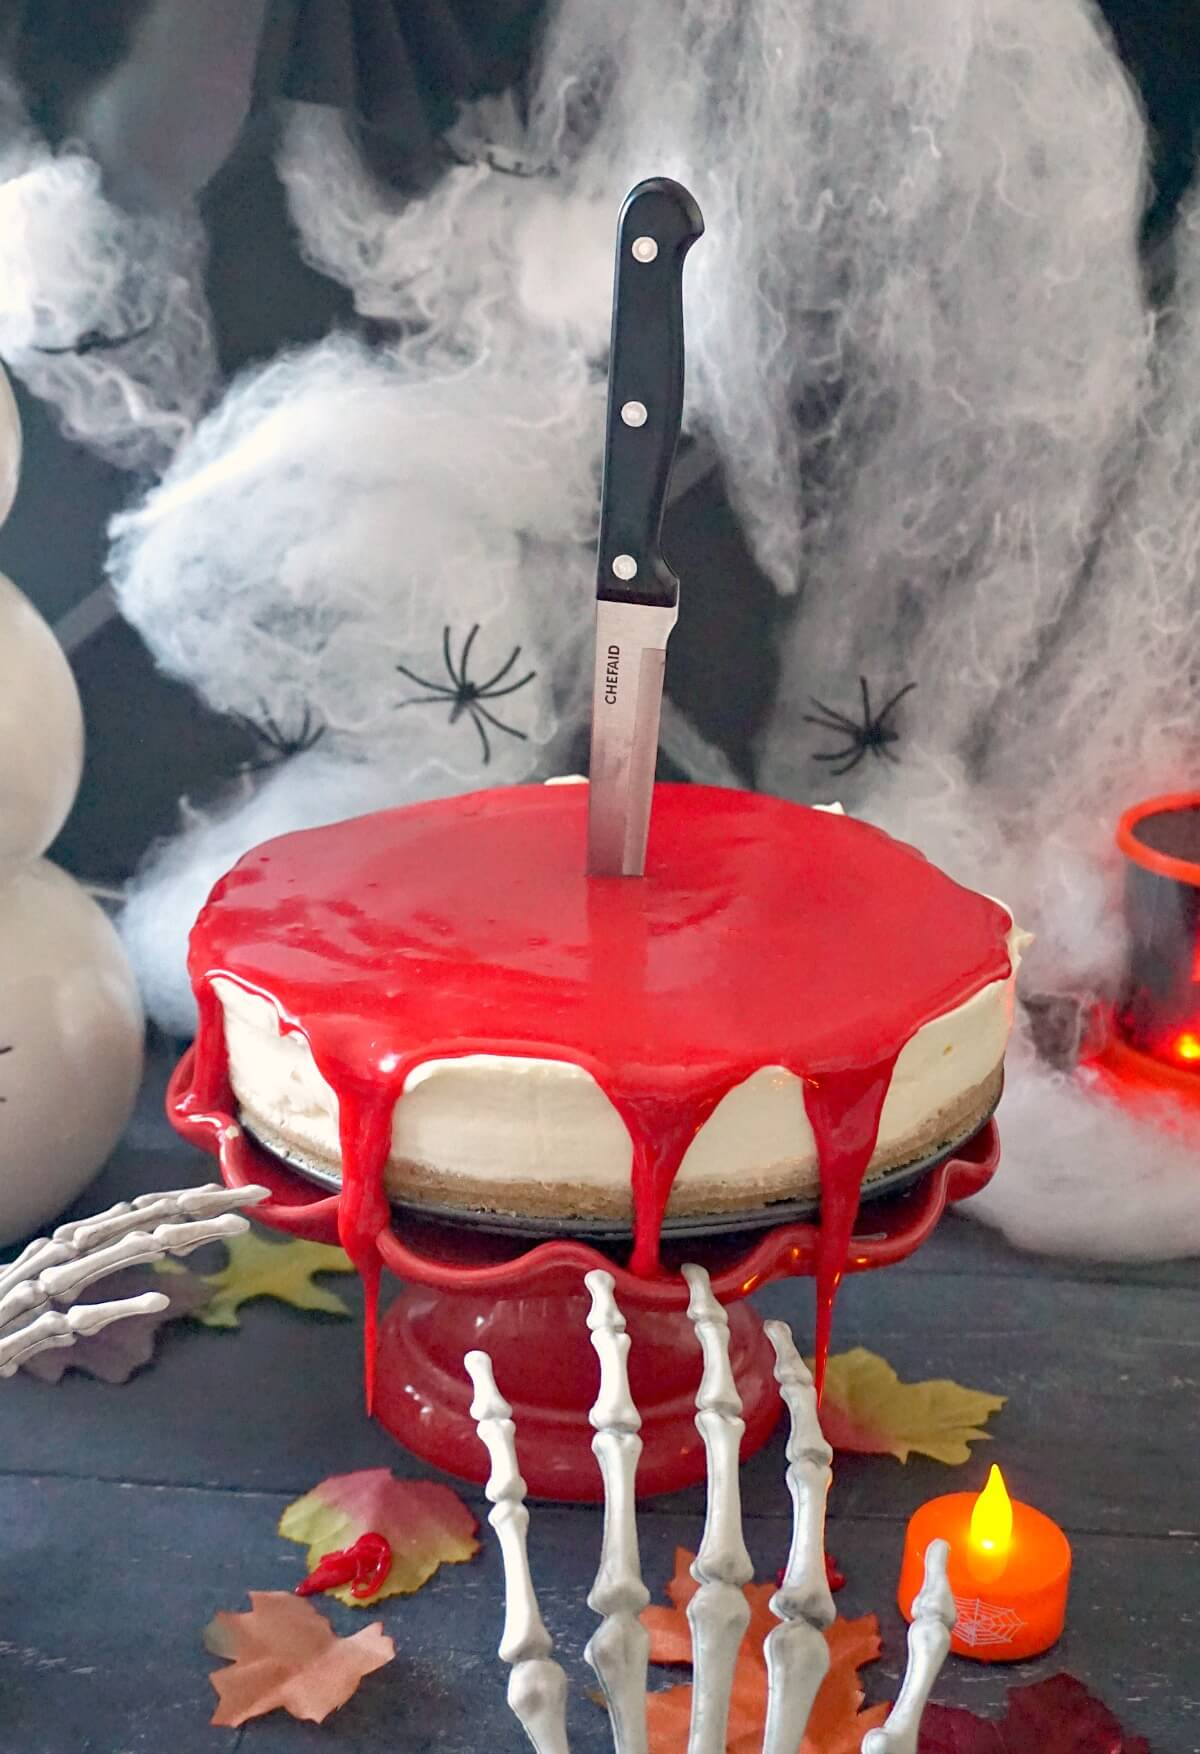 A bleeding cheesecake on a red cake stand with Halloween decorations around.